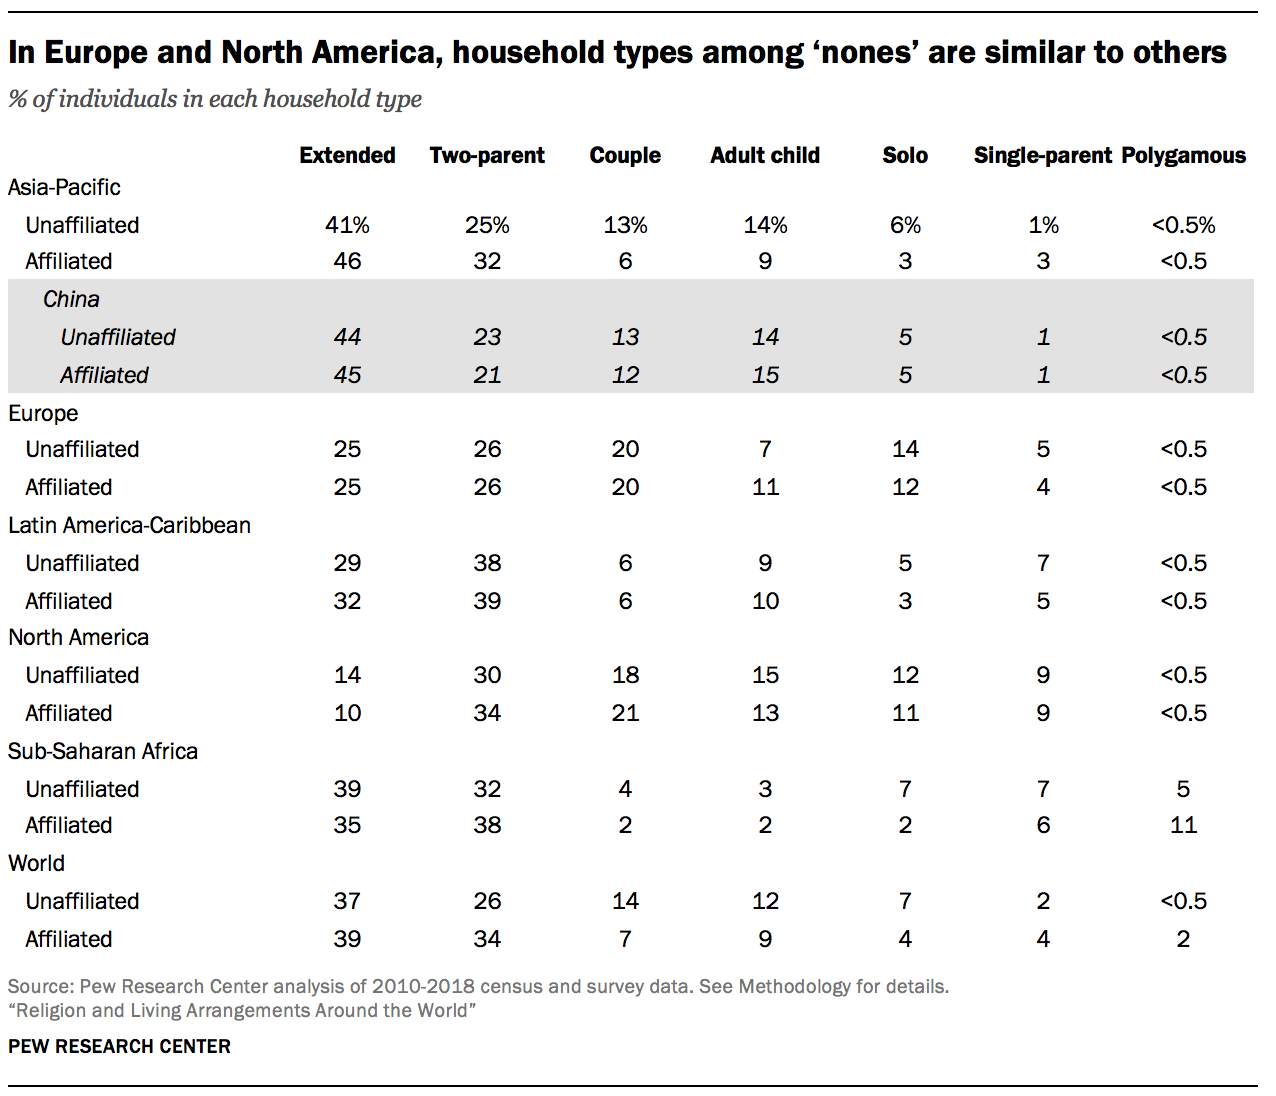 In Europe and North America, household types among ‘nones’ are similar to others